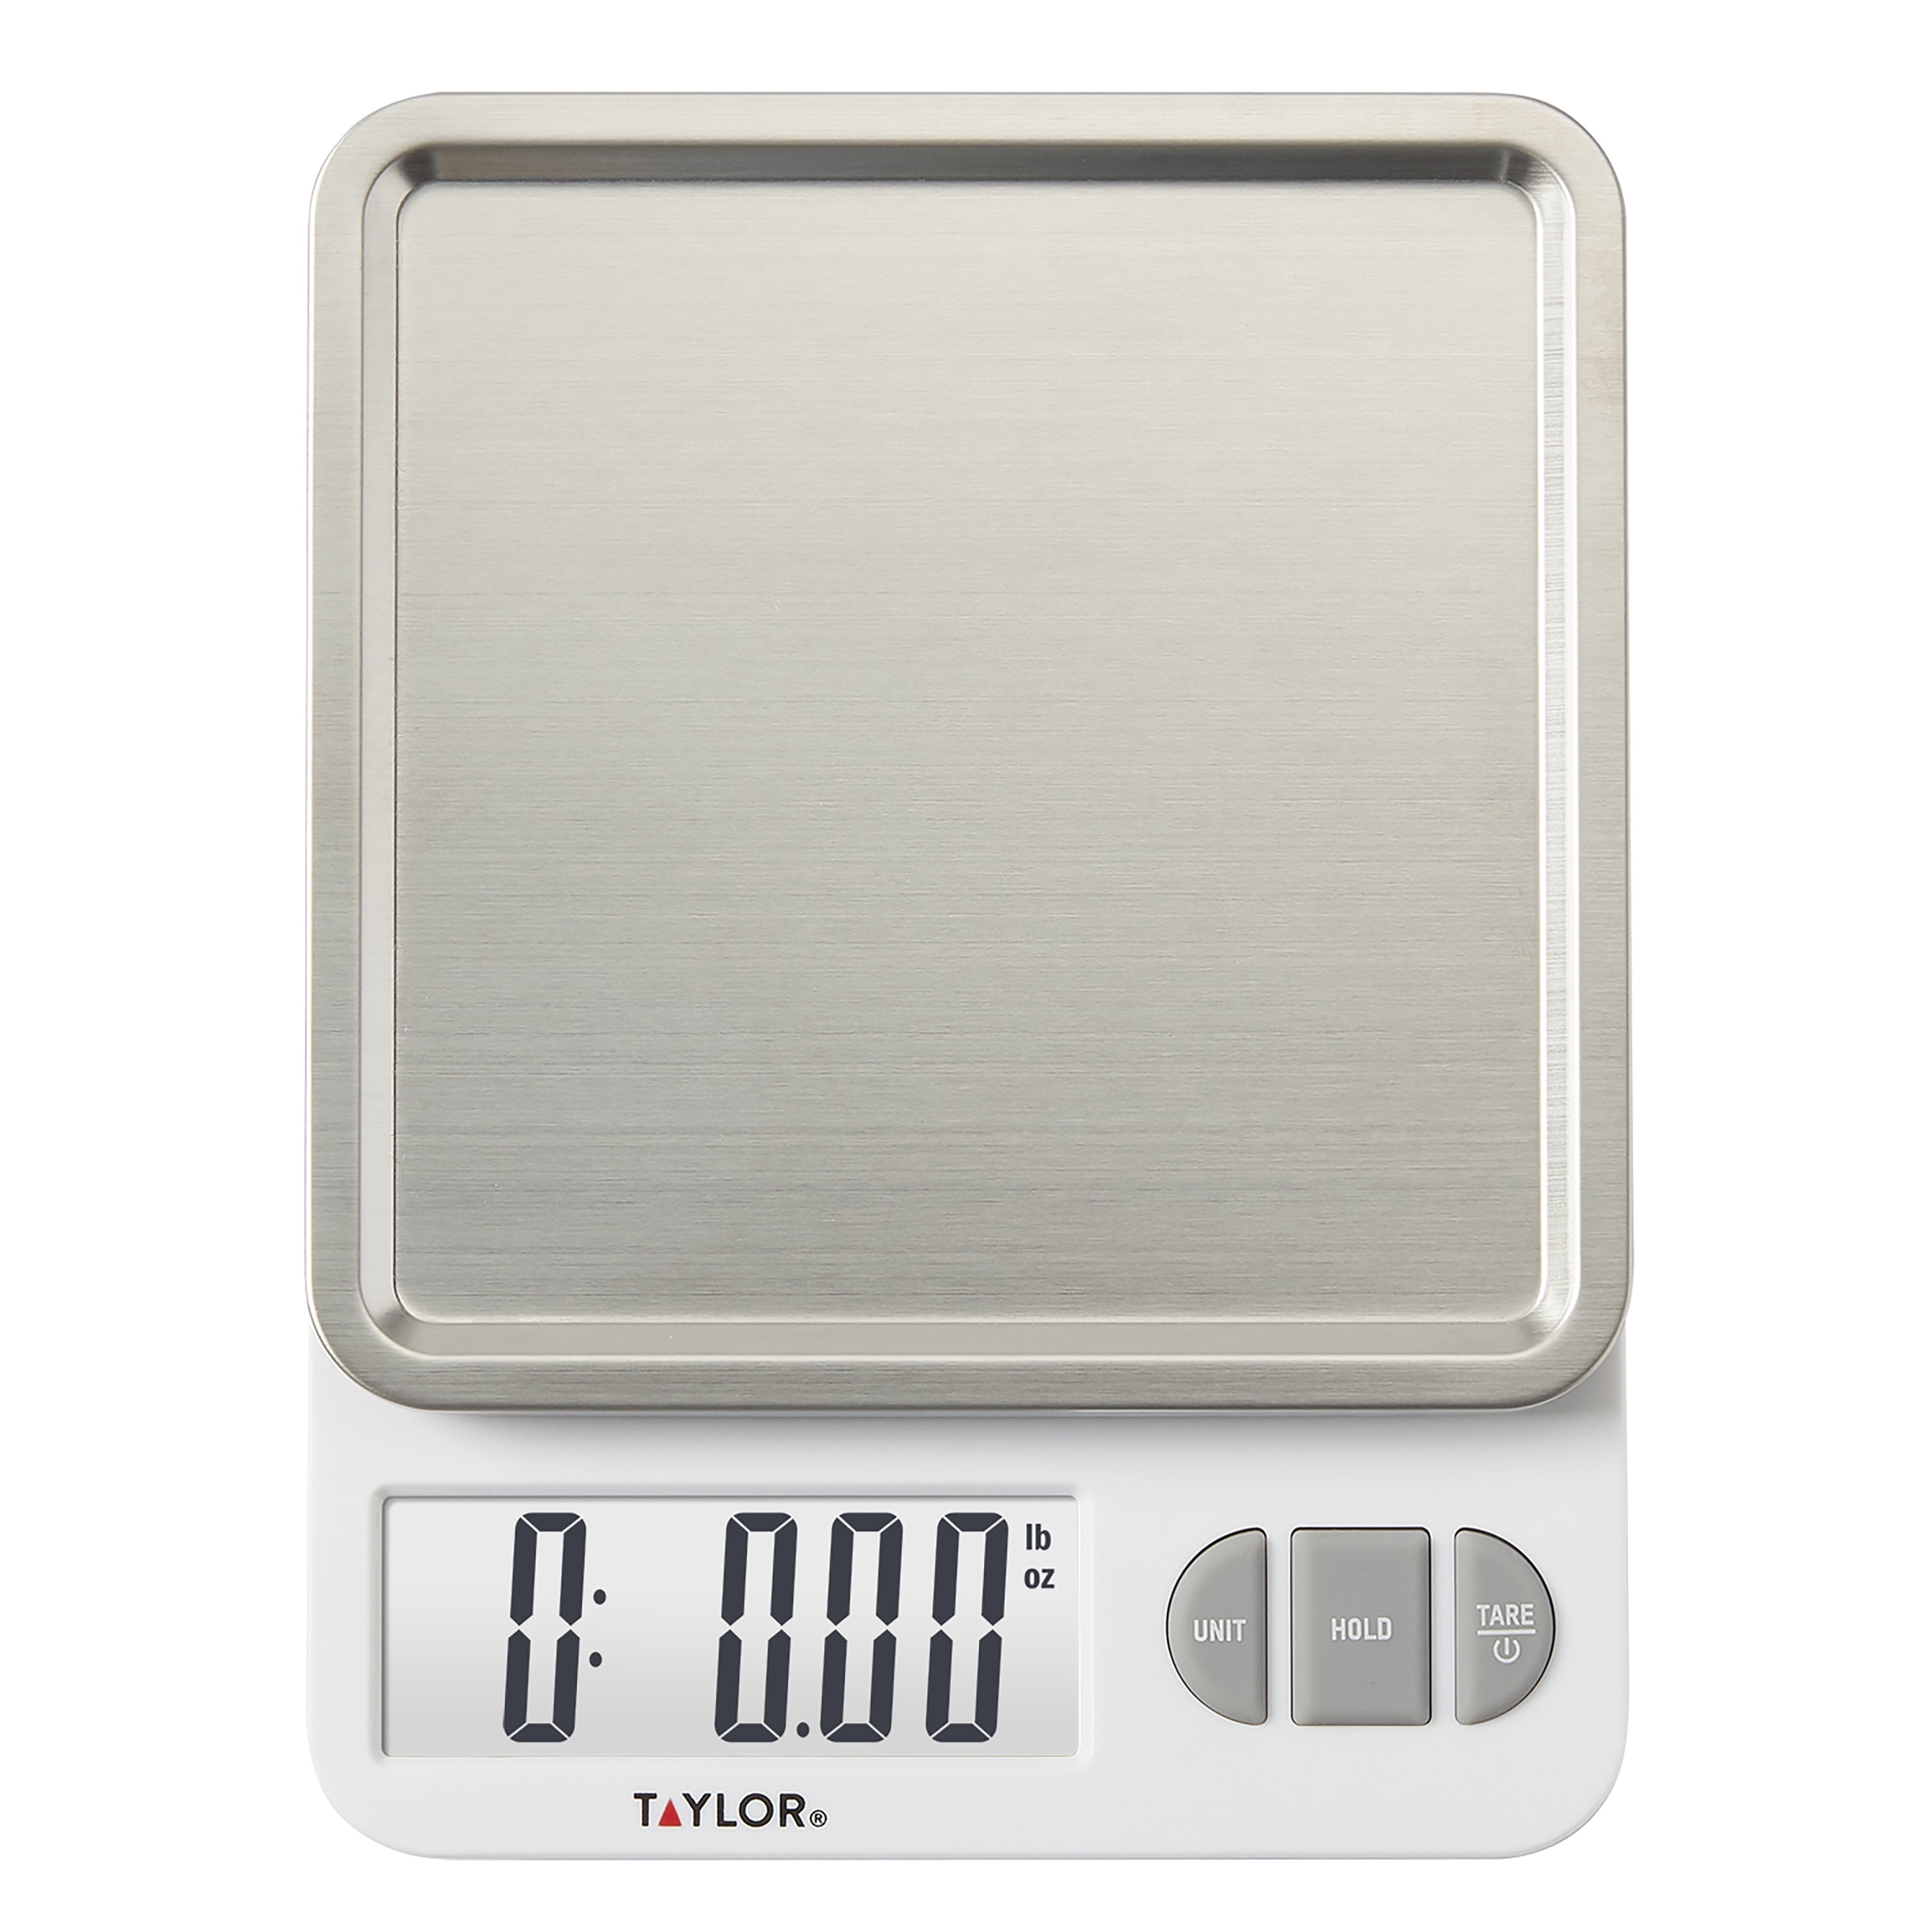 NEW American Weigh Digital Kitchen Scale Gray 500 x 0.01G LB-501 